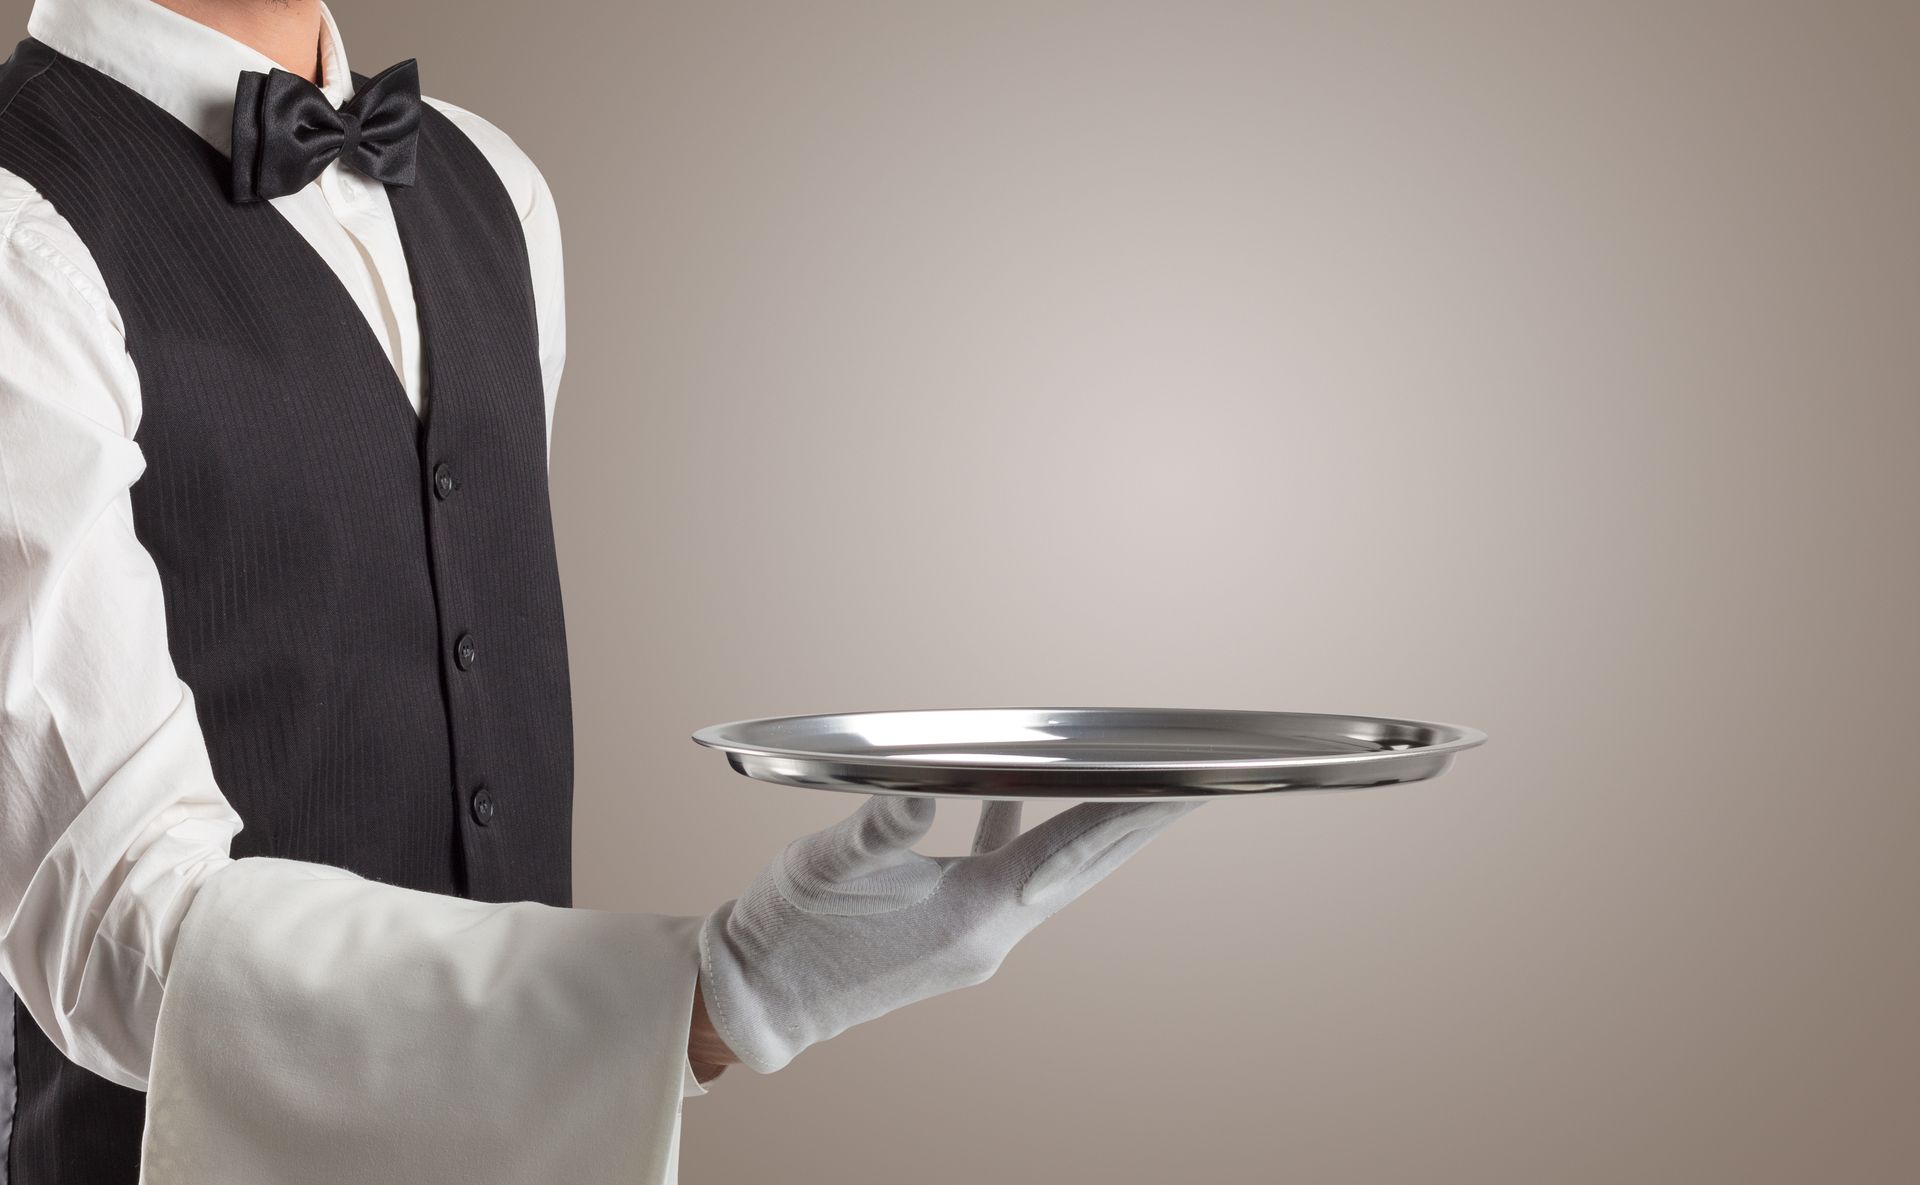 Waiter carrying a tray